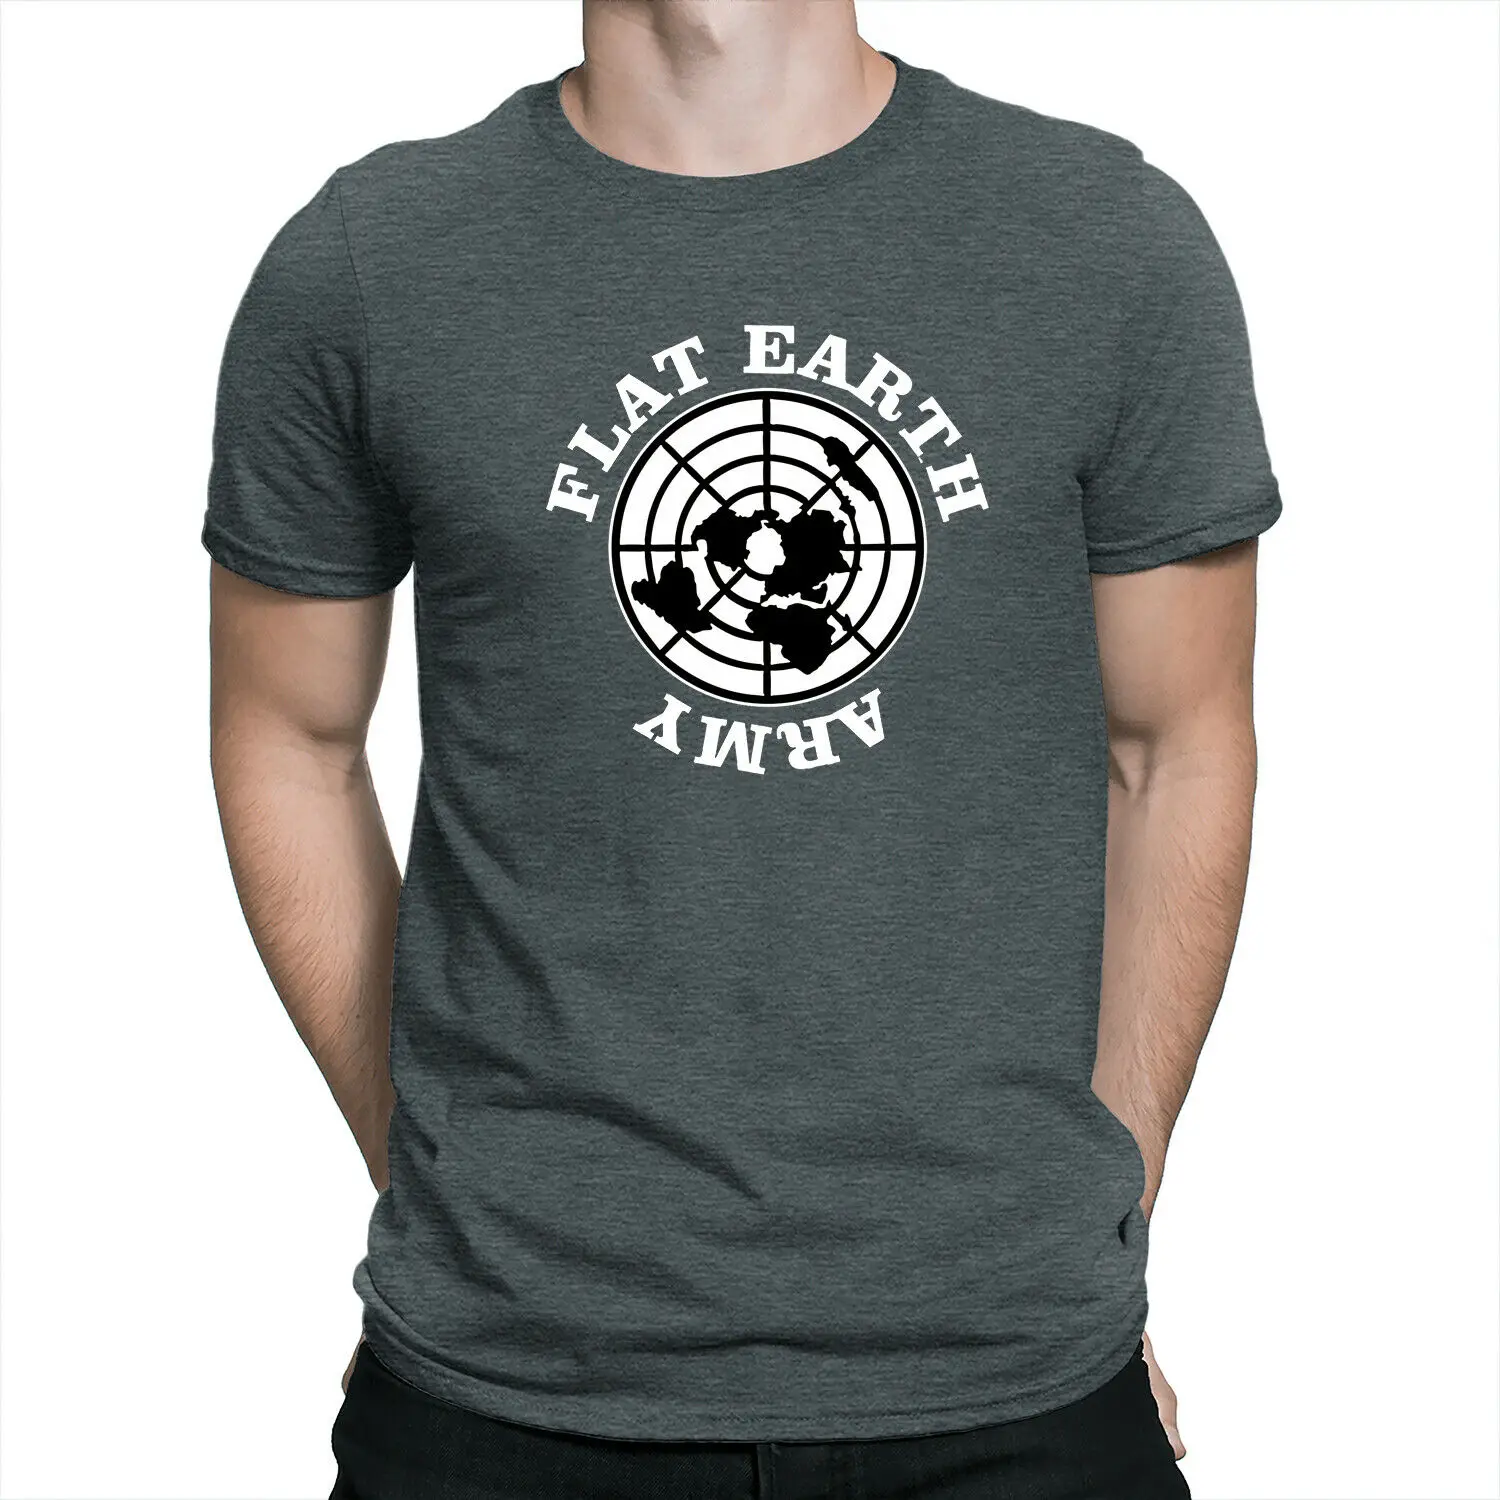 Flat Earth Army T-Shirt - Truth Movement, Flatearth Theory Cult Funny Men Tee Unisex Tees